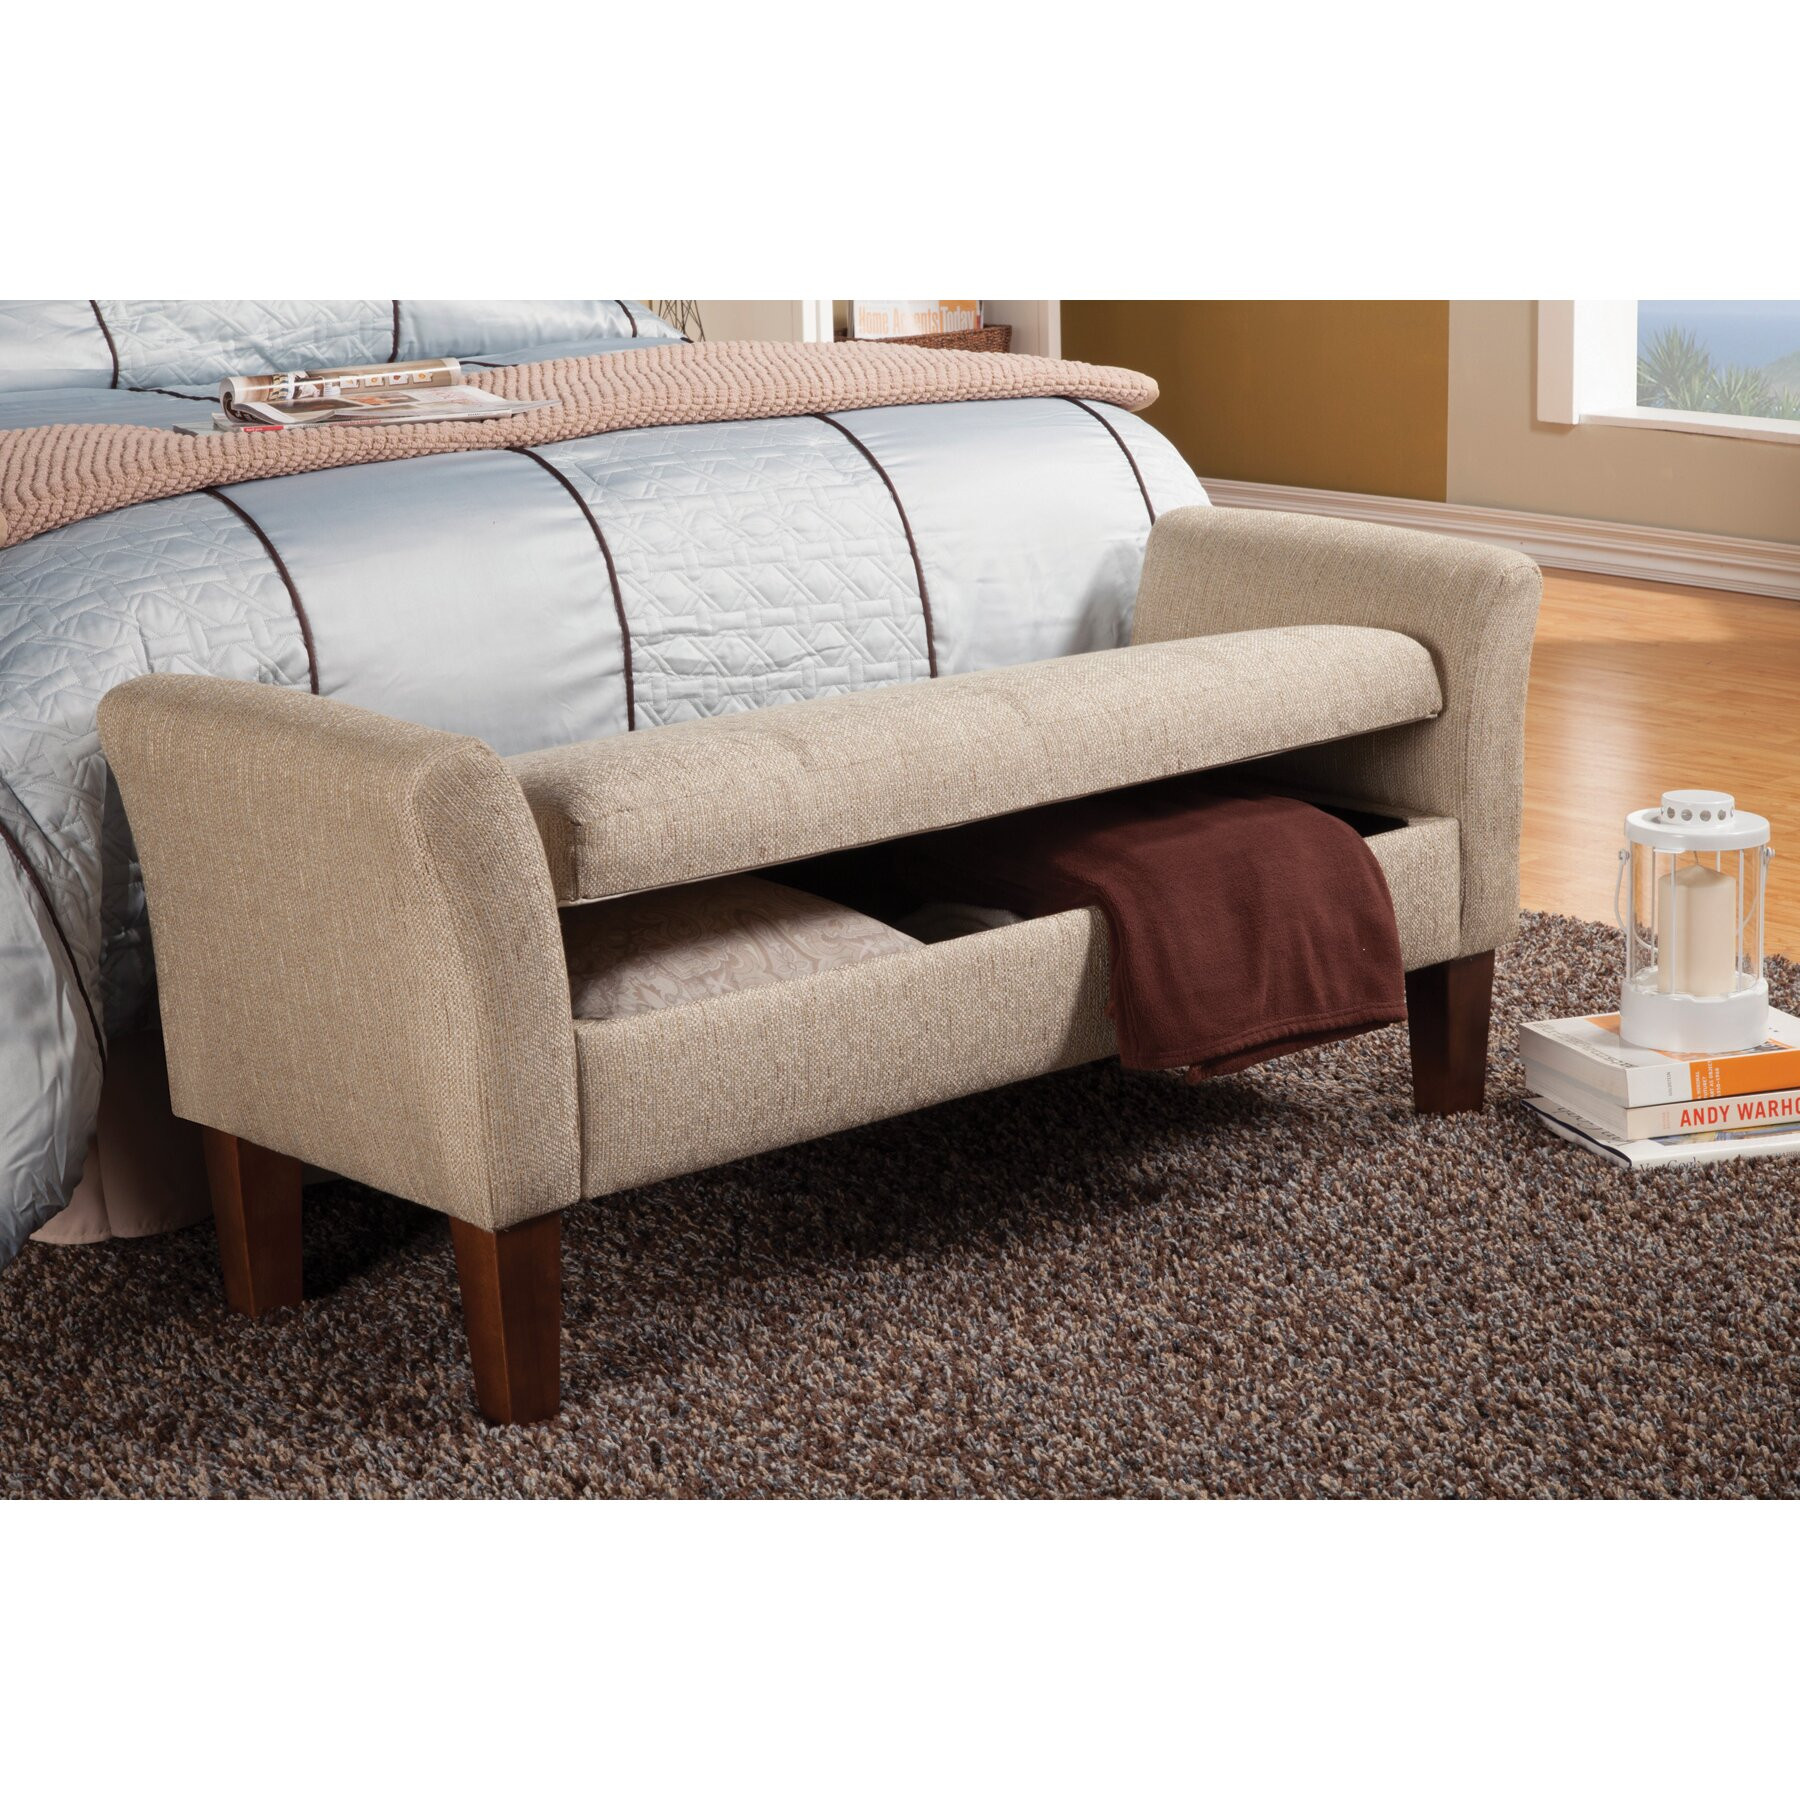 Bench For Bedroom With Storage
 Wildon Home Upholstered Storage Bedroom Bench & Reviews